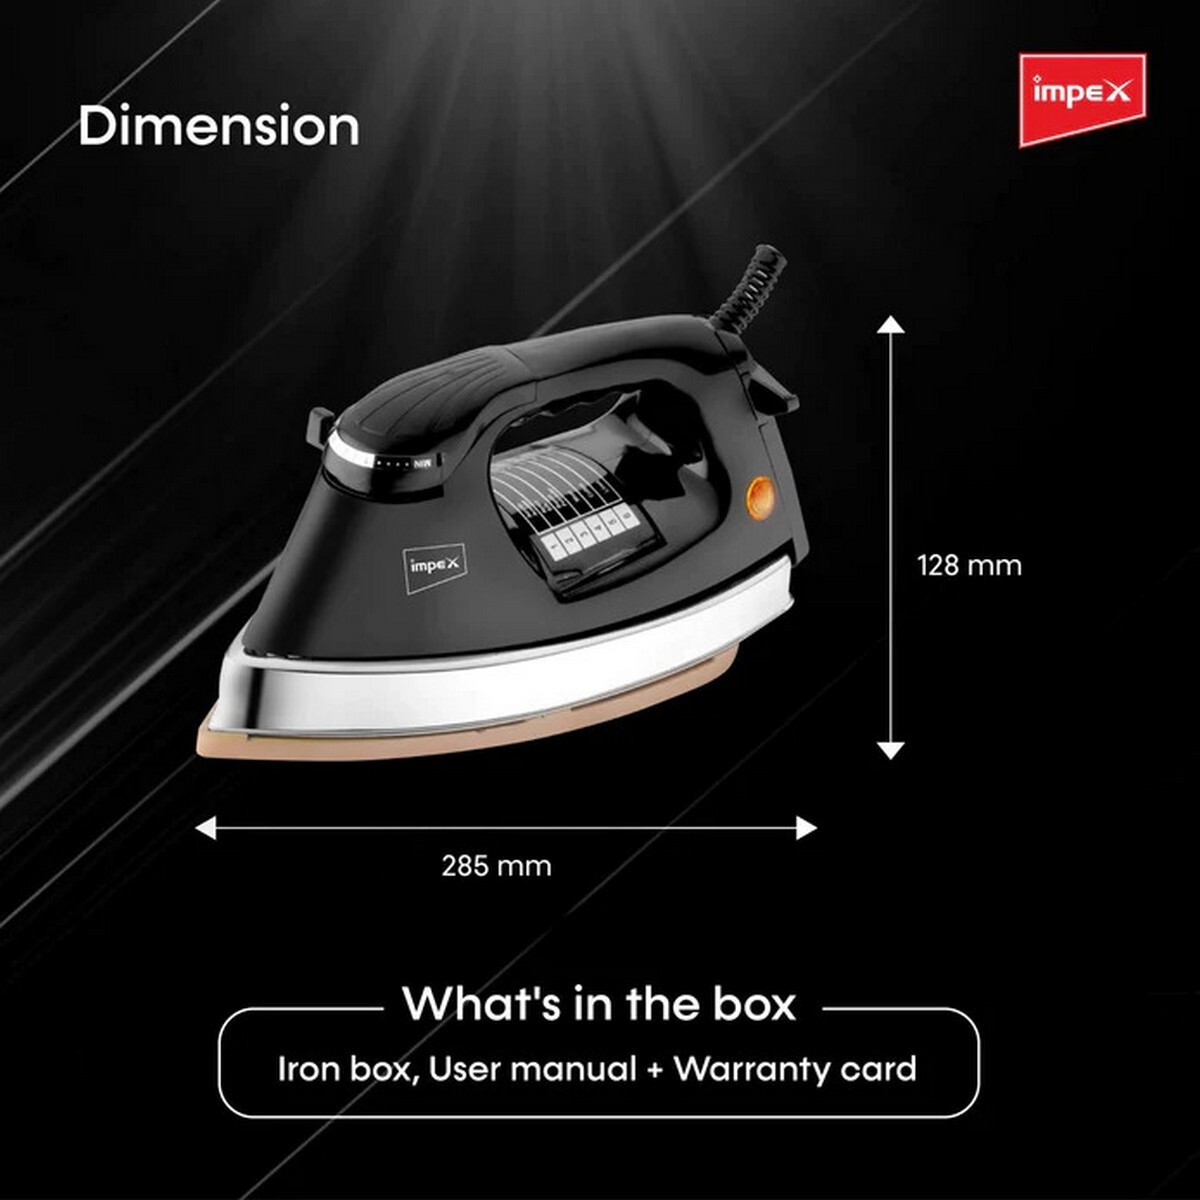 Impex Heavy Weight Electric Iron Box (Big B)